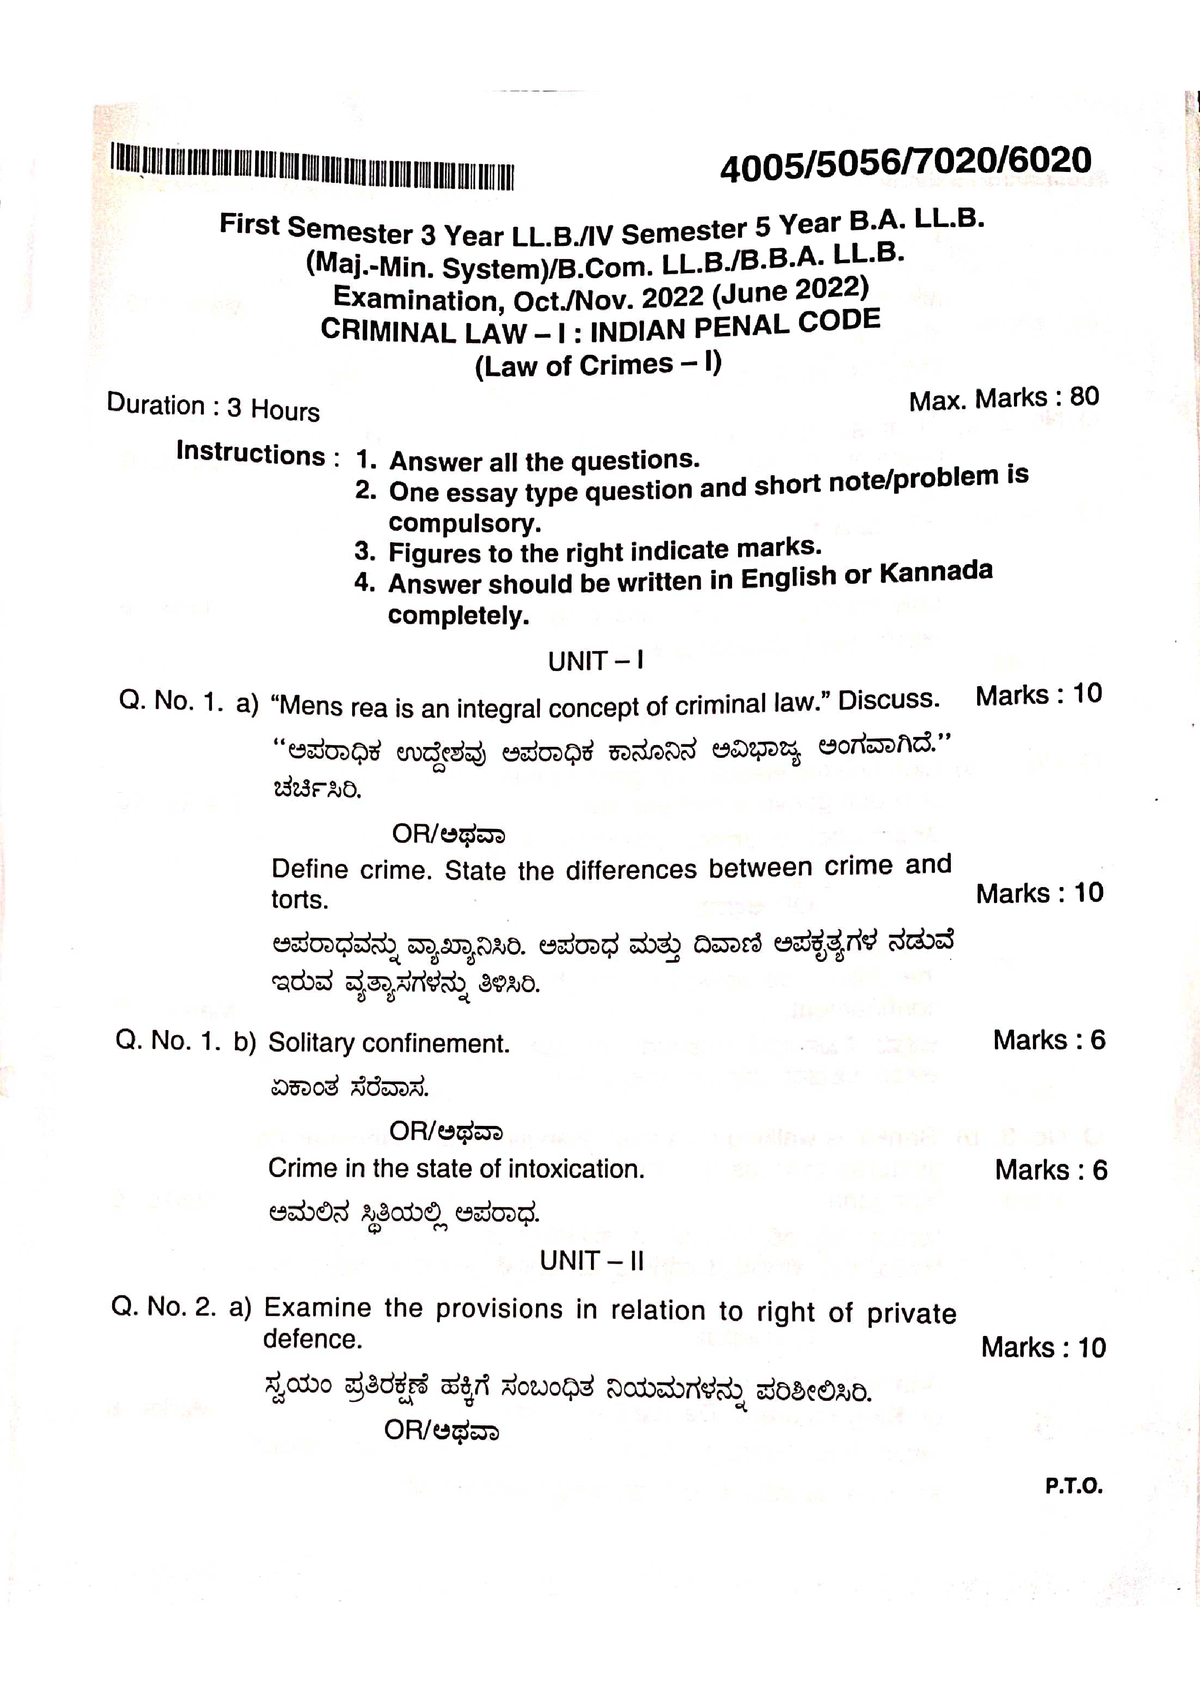 IPC Old Question Paper From 2018 to 2022 - Llb 3 years - Studocu